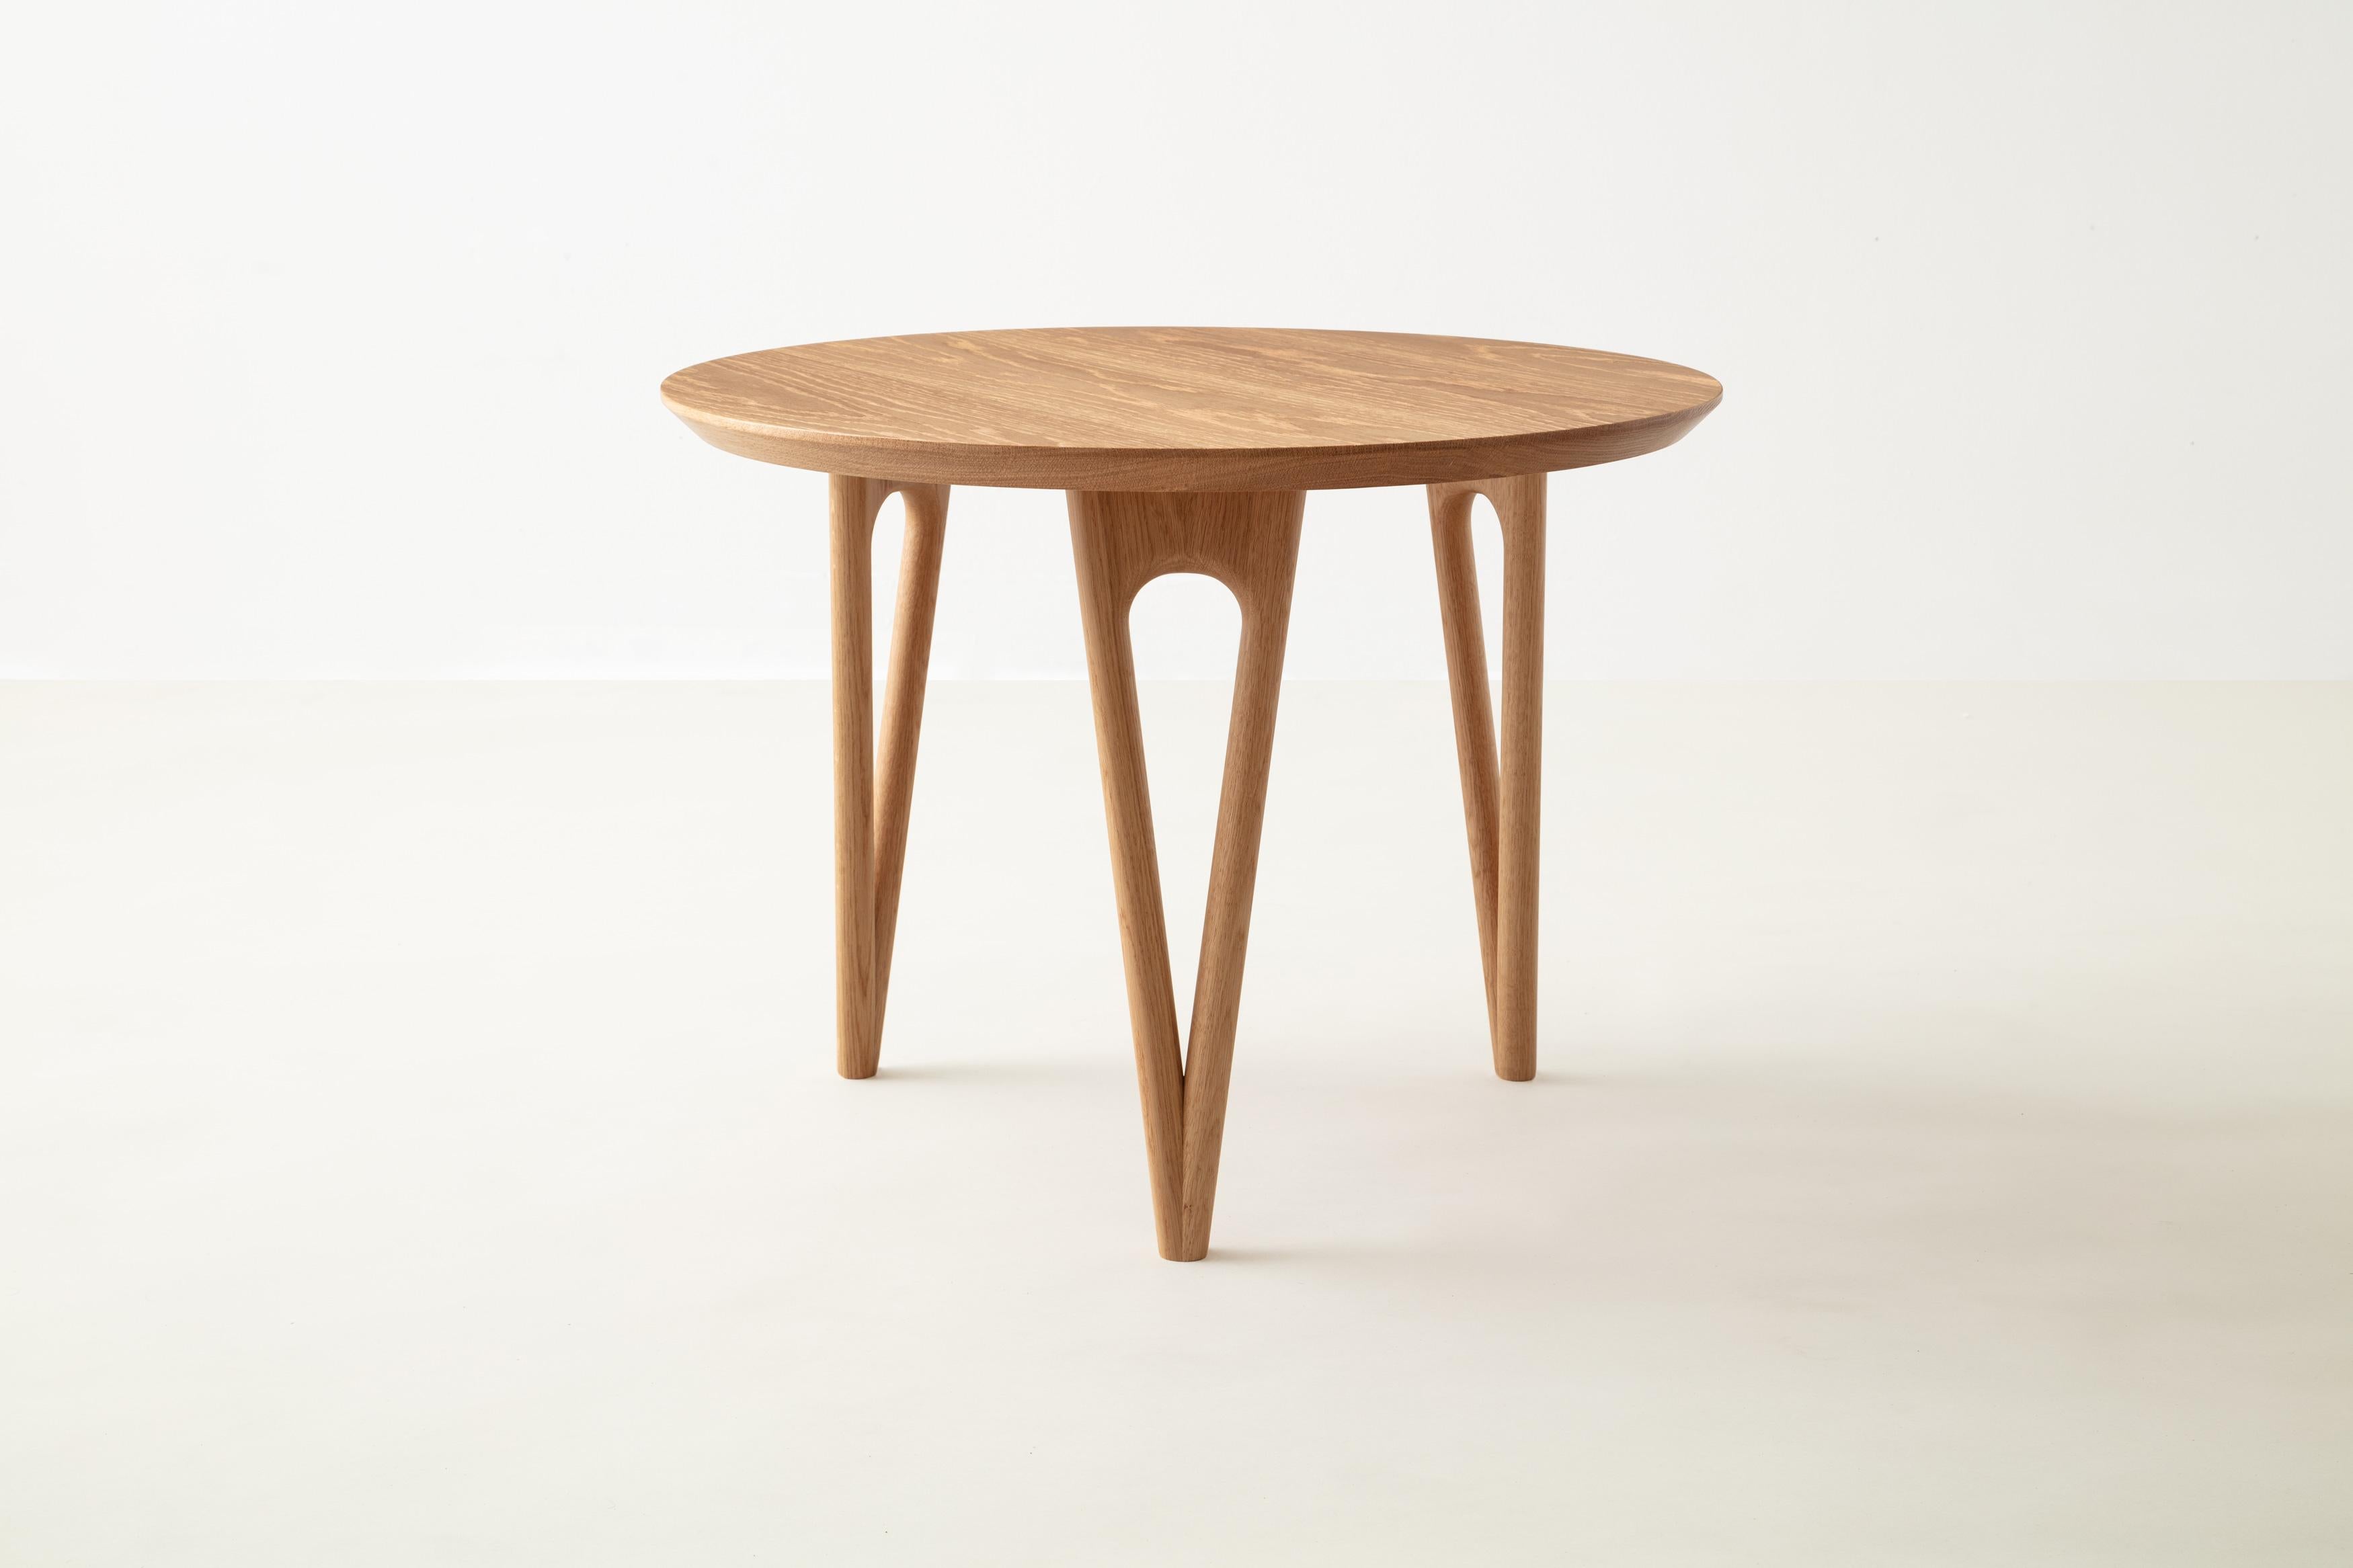 The hair pin table uses a solid wood interpretation of a classic leg giving new style to this seemingly traditional support.

Shown in white oak and also available in ash, cherry, maple or walnut.

Sizes available: 
18